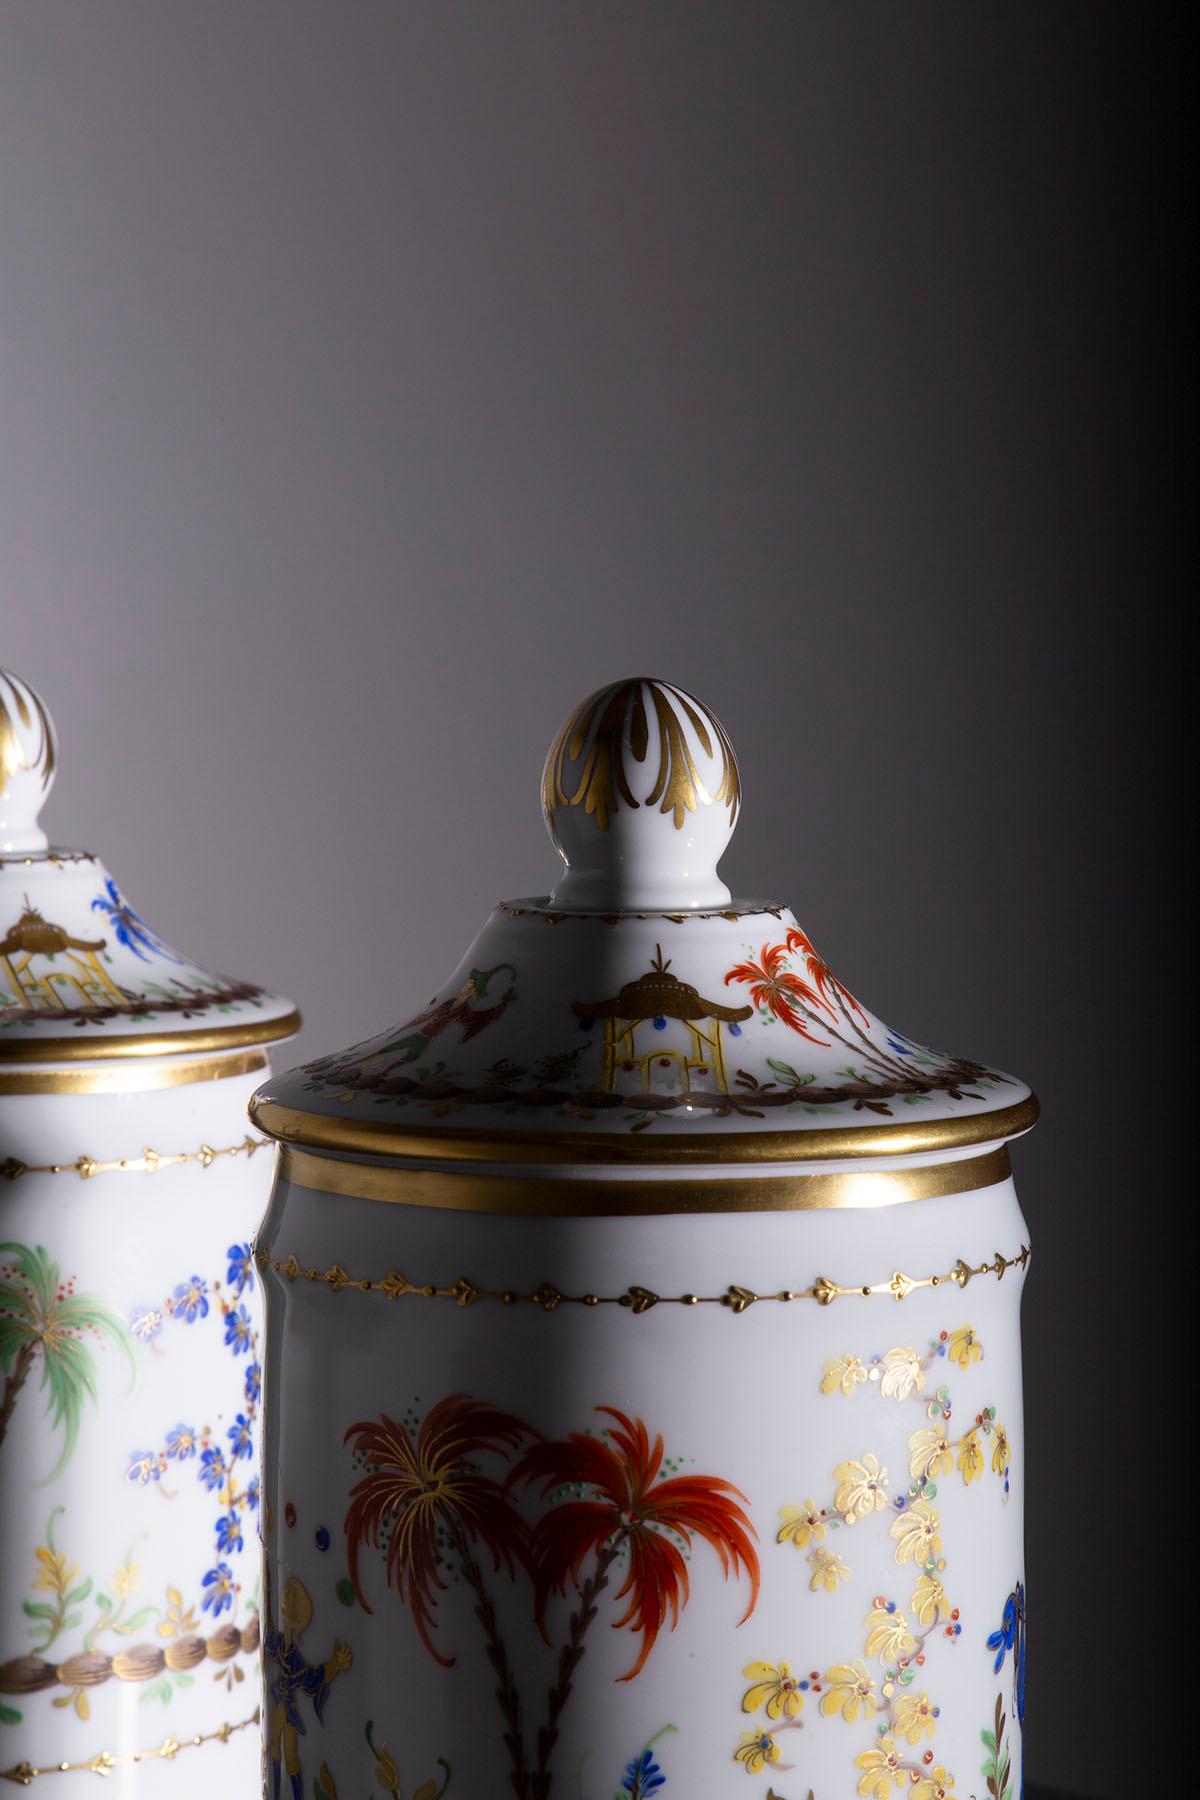 Before us unfolds a pair of pharmacy jars in exquisite porcelain, bearing the signature of Le Tallec—an authentic masterpiece that transcends mere artwork. These jars encapsulate a captivating history and timeless beauty.

The dating of these jars